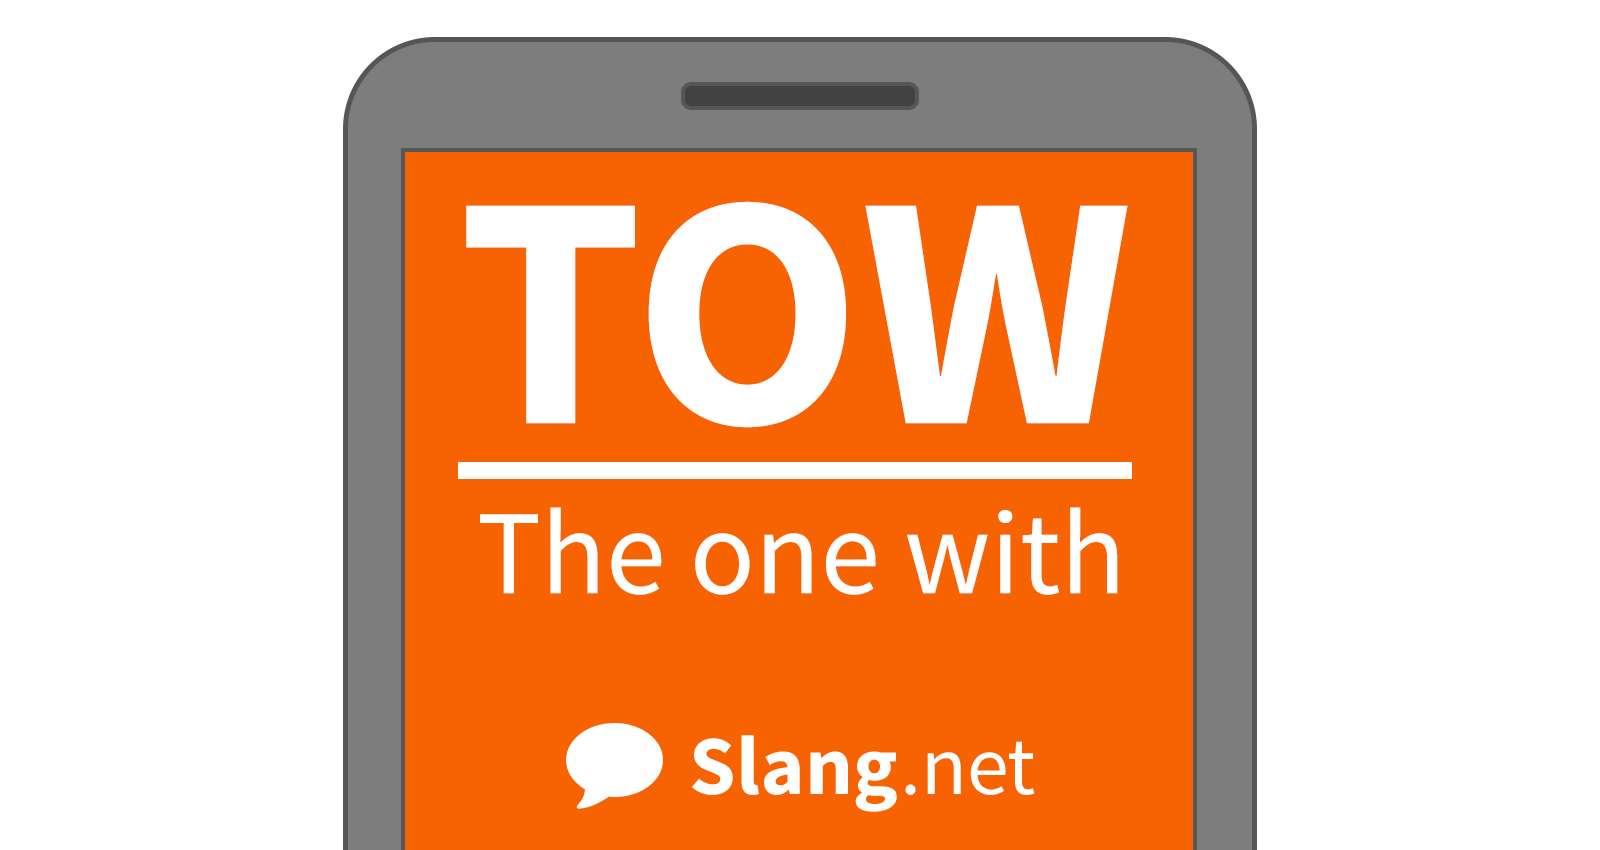 Have you seen the message? TOW the TOW acronym...